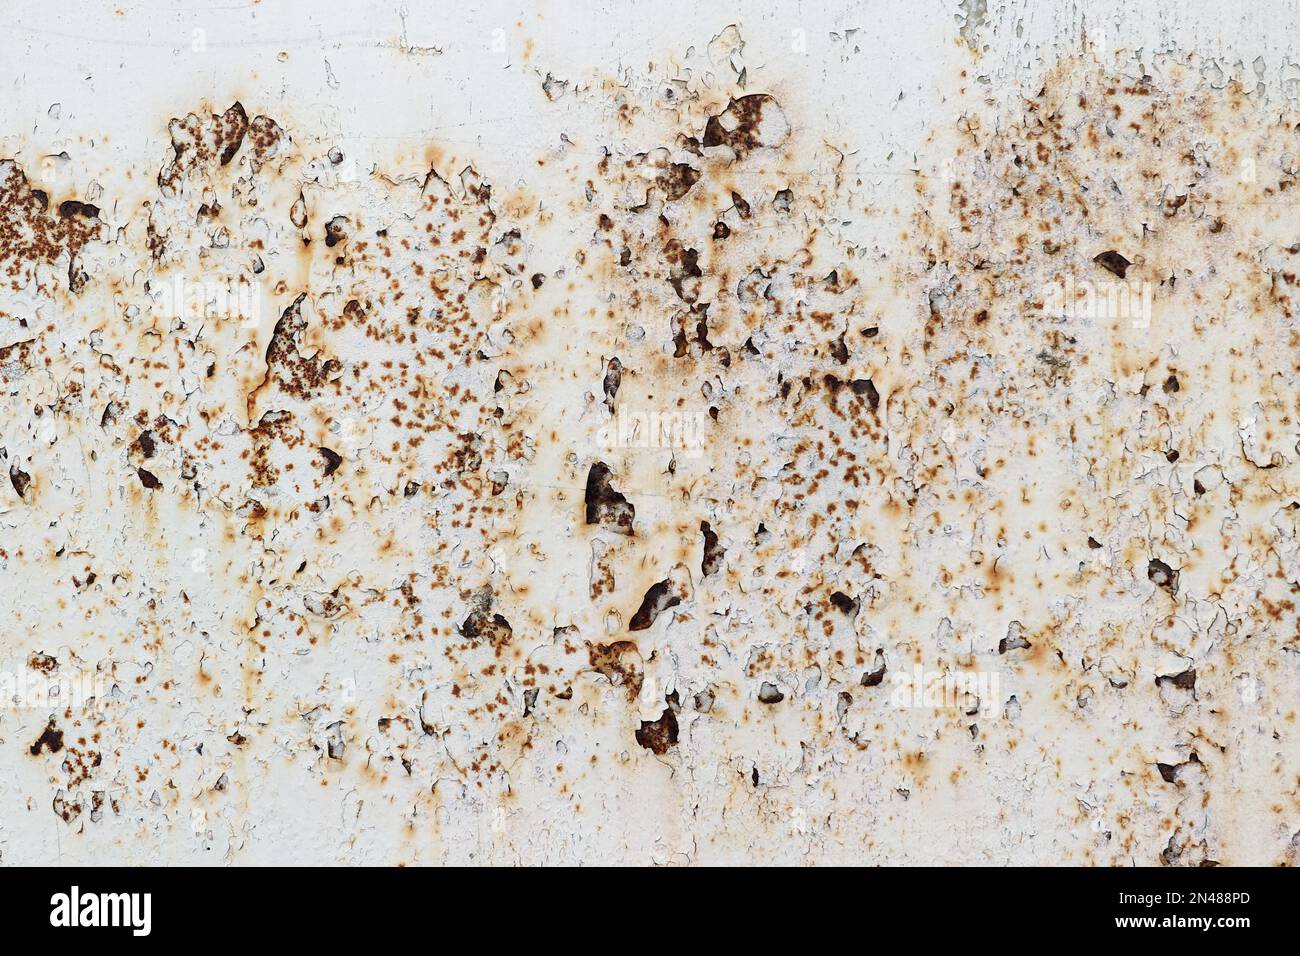 Detail of the flaking paint from the metal surface Stock Photo